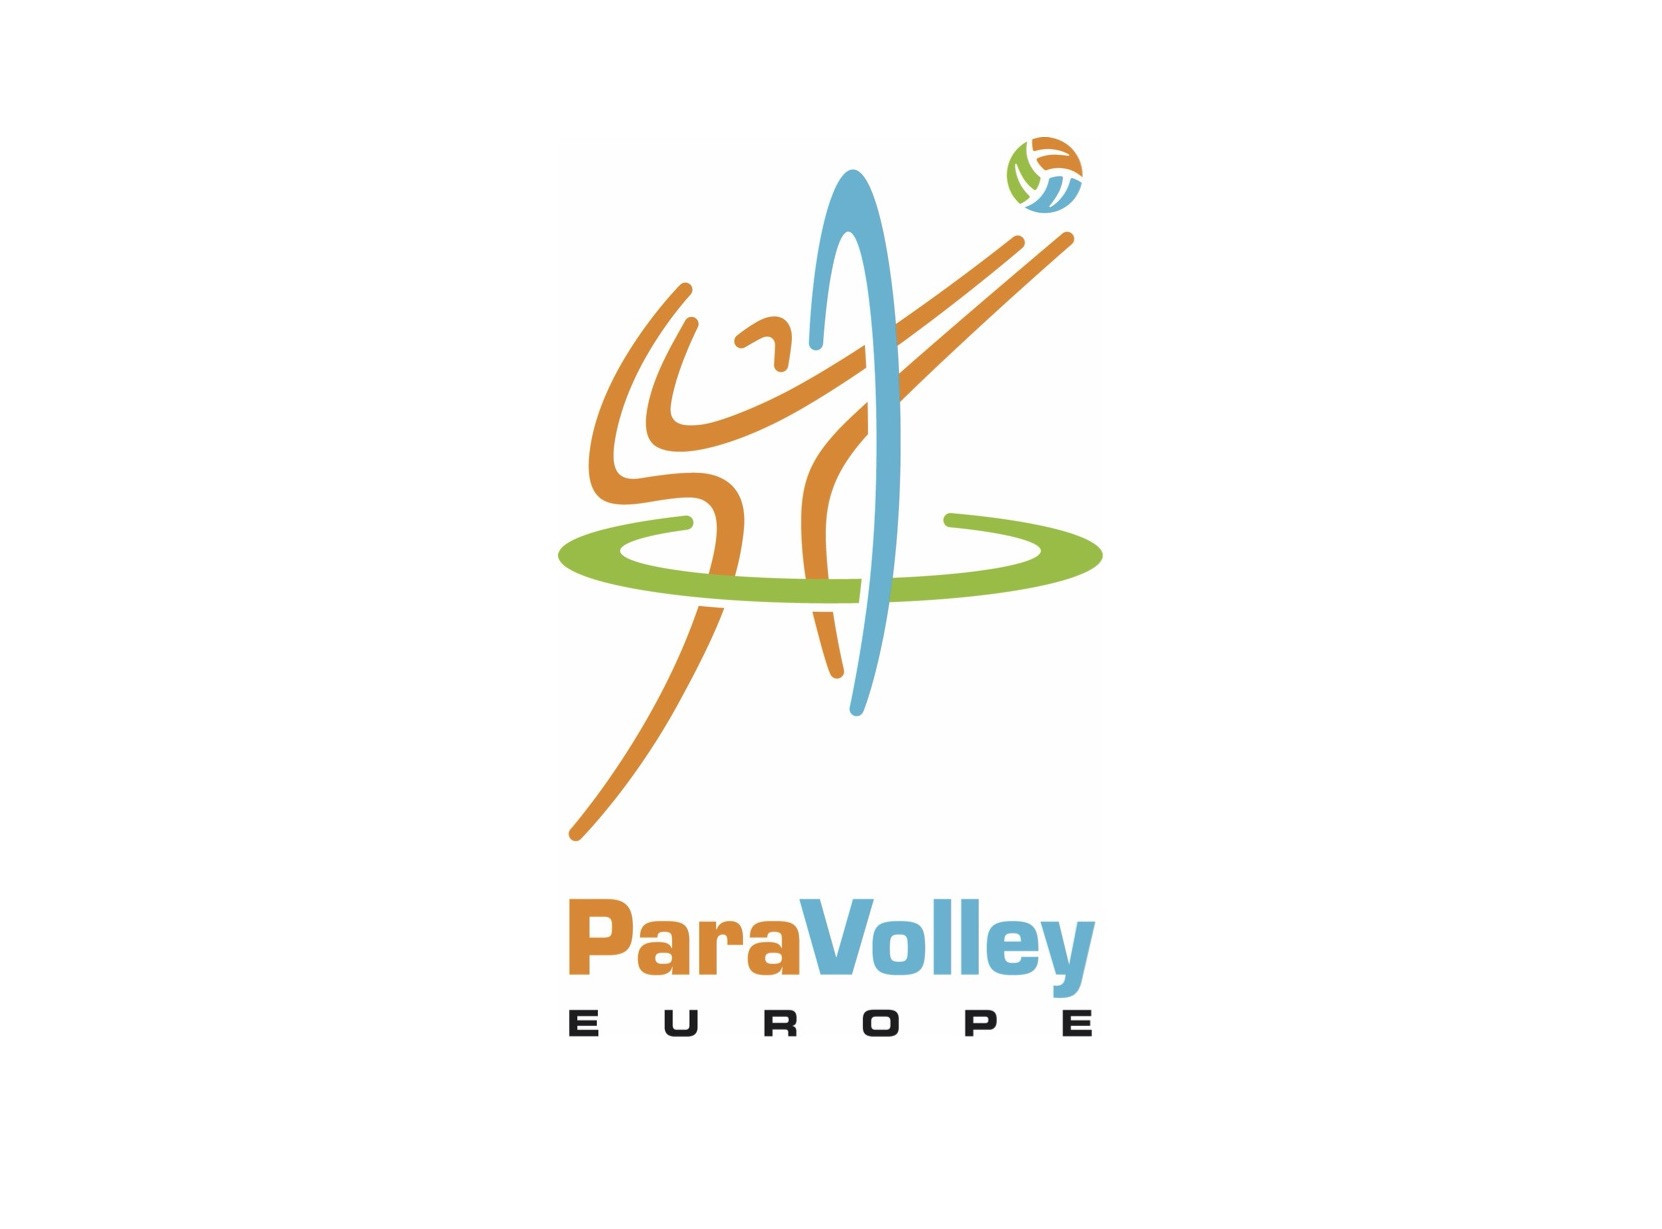 ParaVolley Europe hires first employee